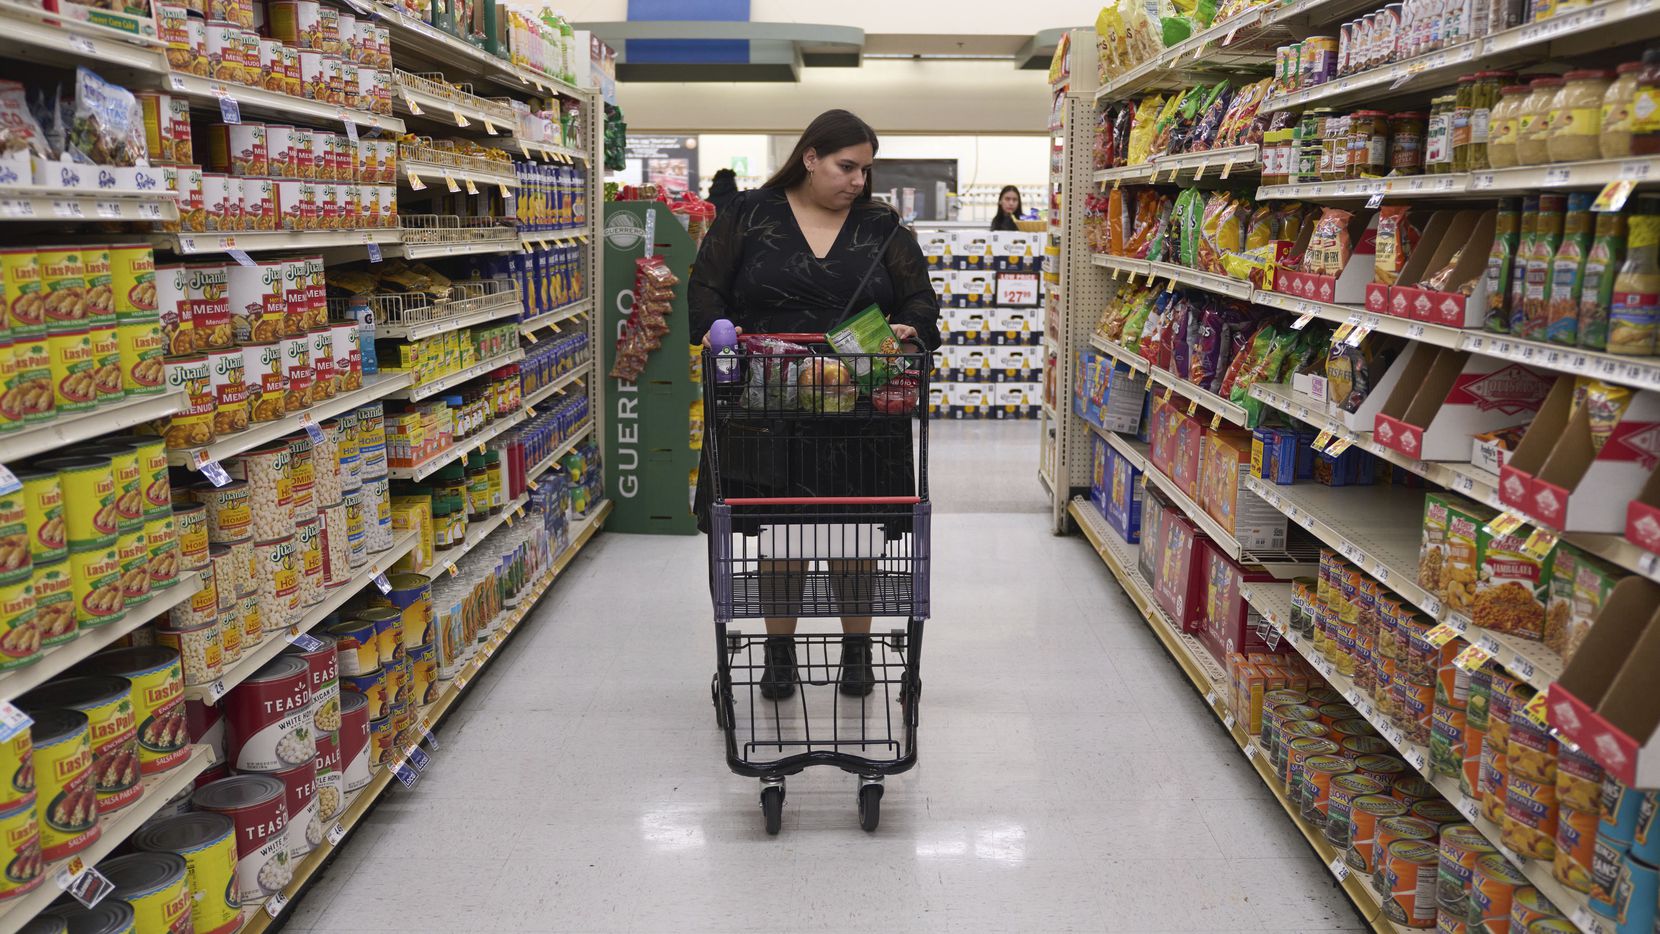 Jaqueline Benitez pushes her cart down an aisle as she shops for groceries at a supermarket...